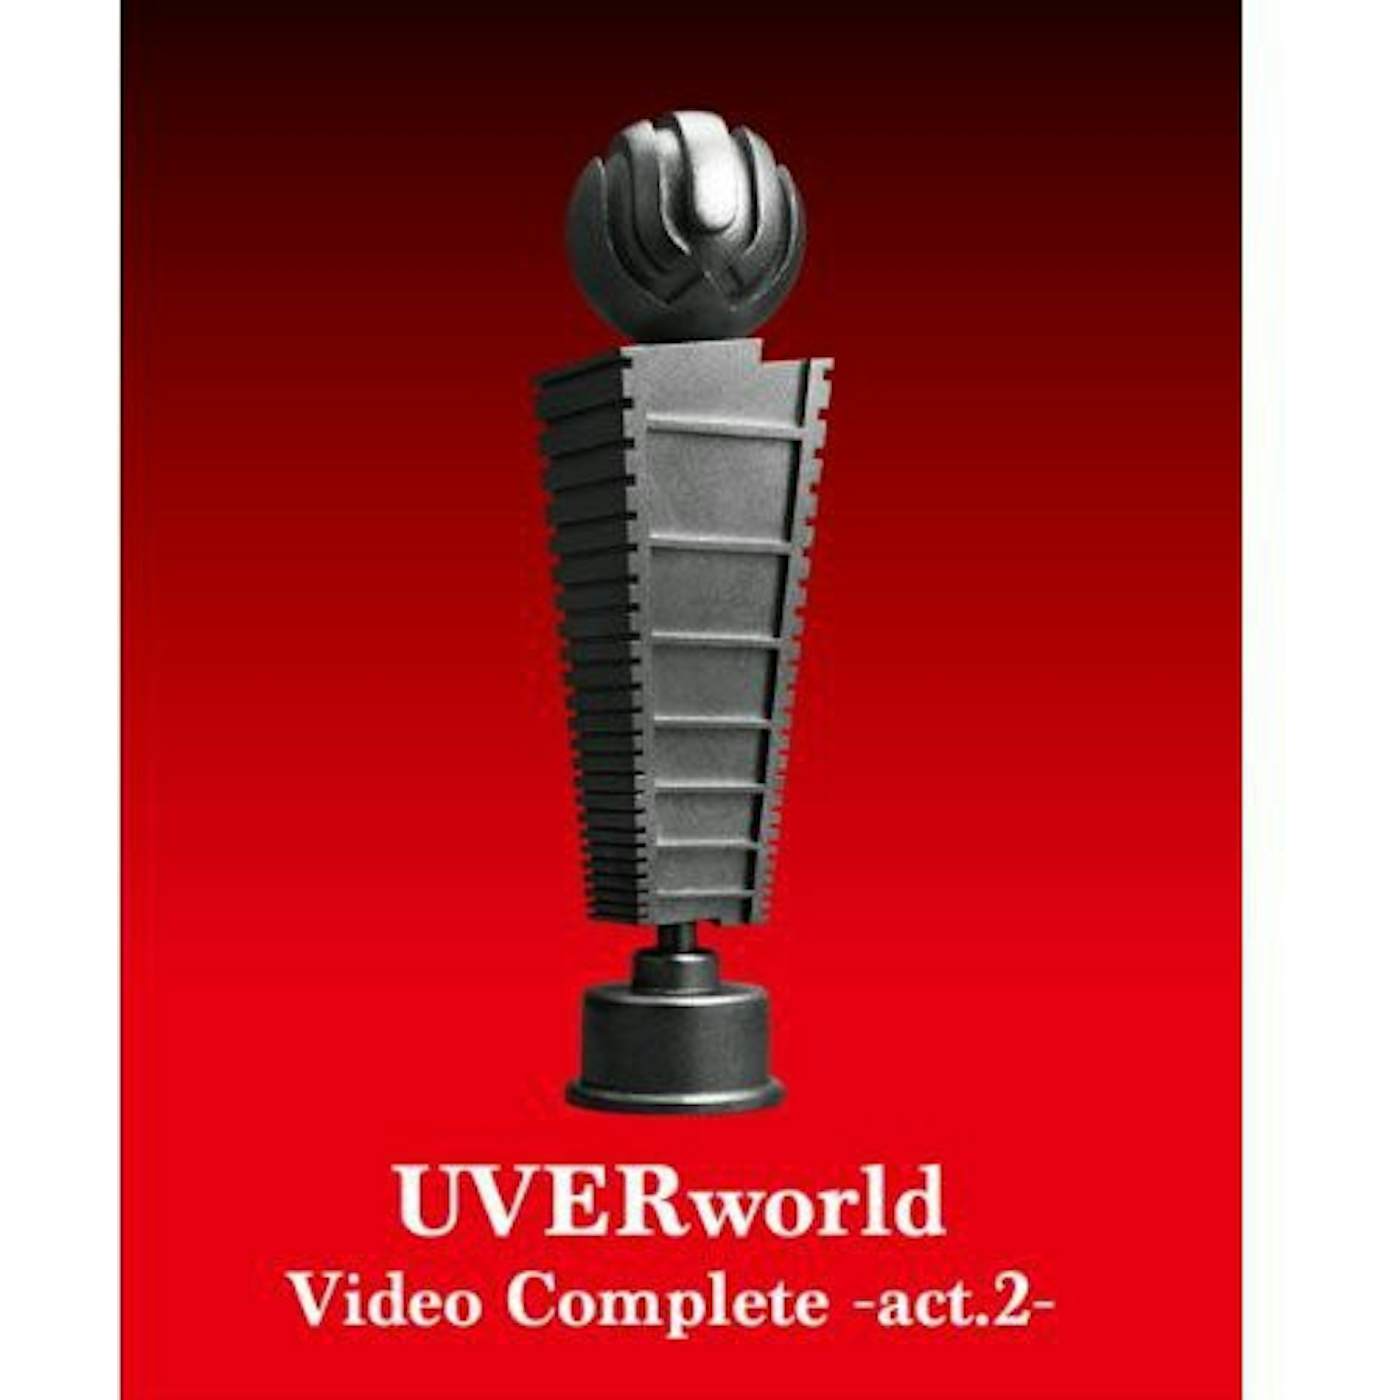 UVERworld VIDEO COMPLETE-ACT.2 Blu-ray